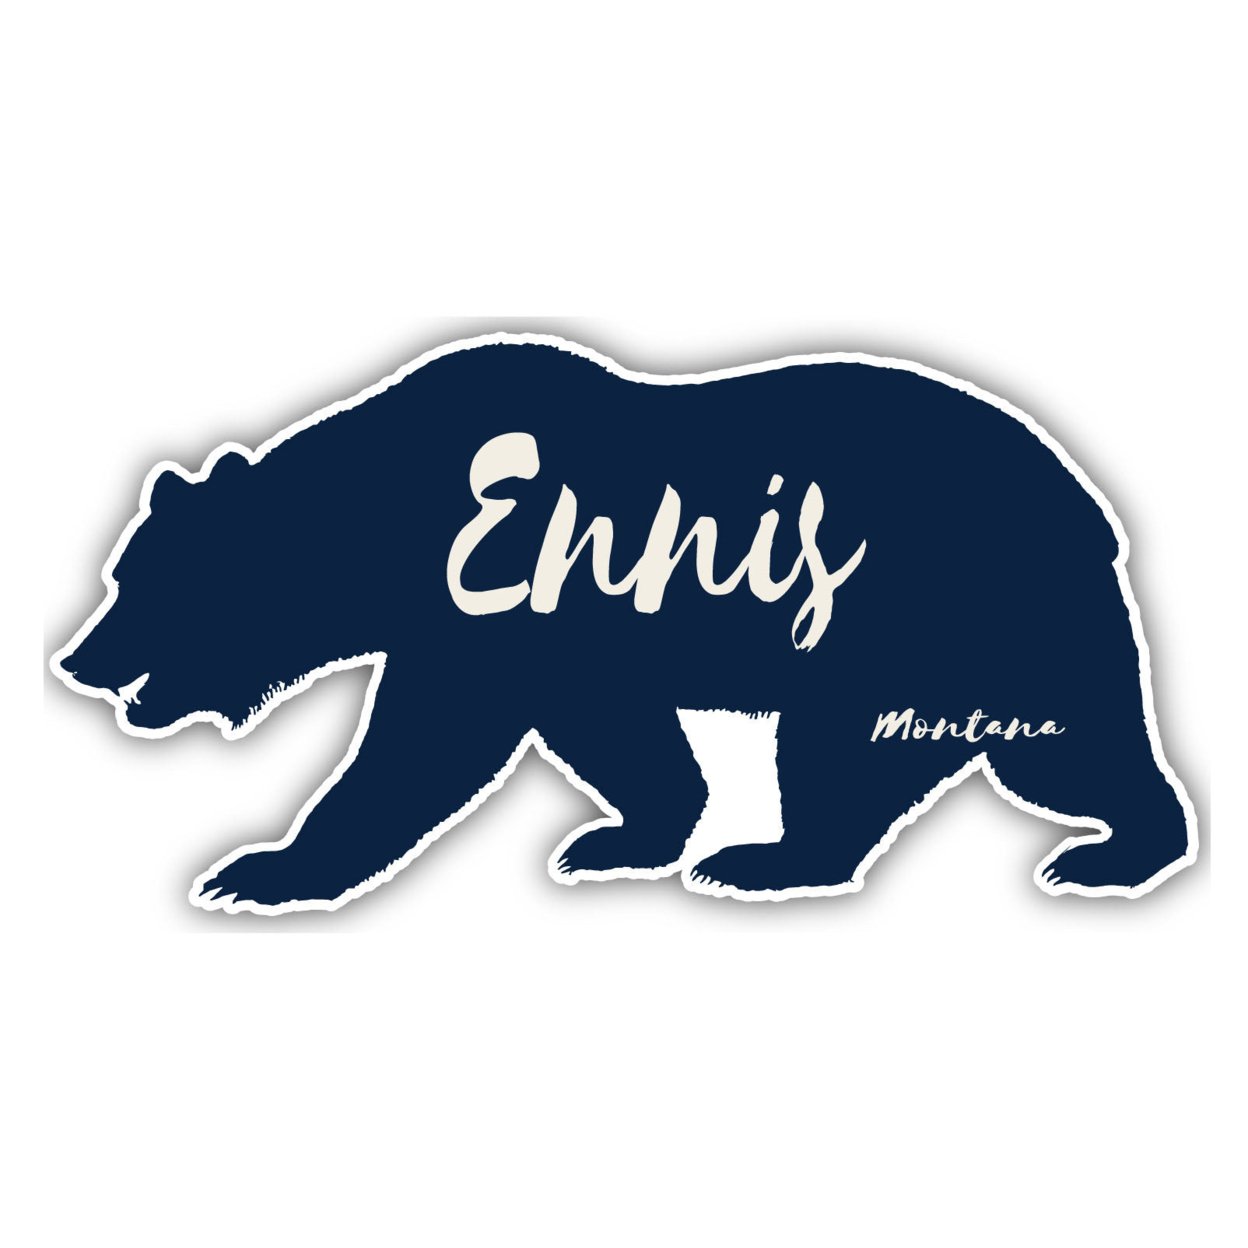 Ennis Montana Souvenir Decorative Stickers (Choose Theme And Size) - 4-Pack, 8-Inch, Great Outdoors